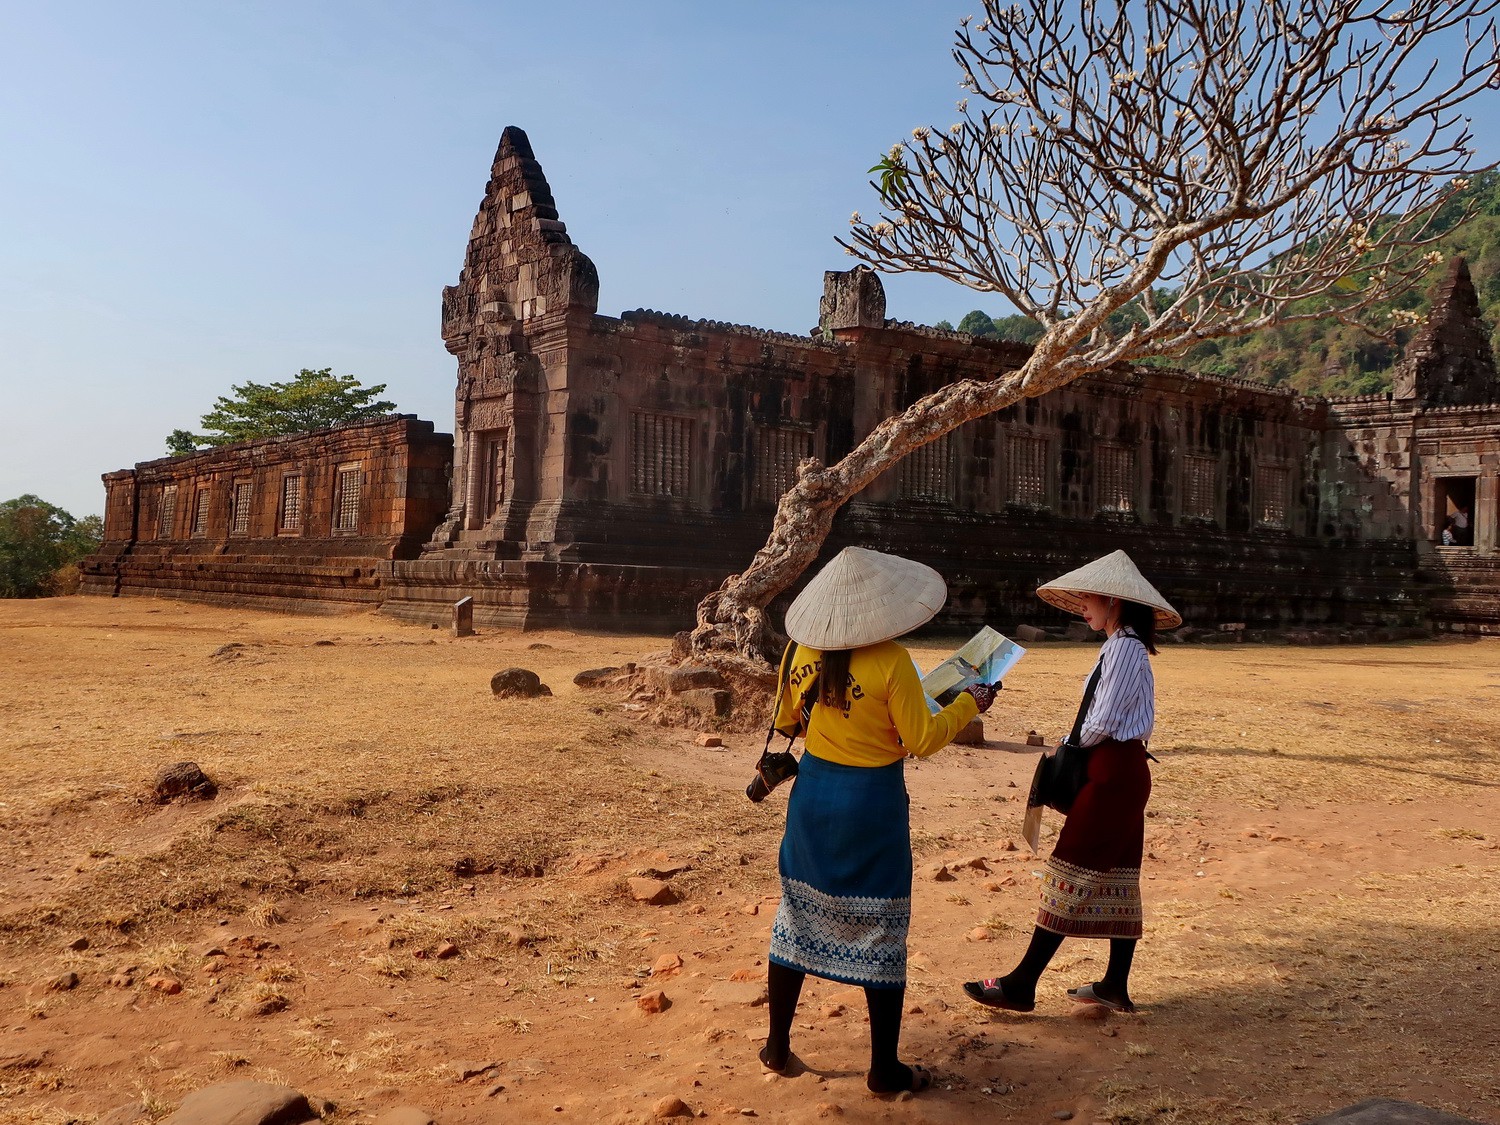 In the lower Wat Phou ruins of the Khmer (11th to 13th century)